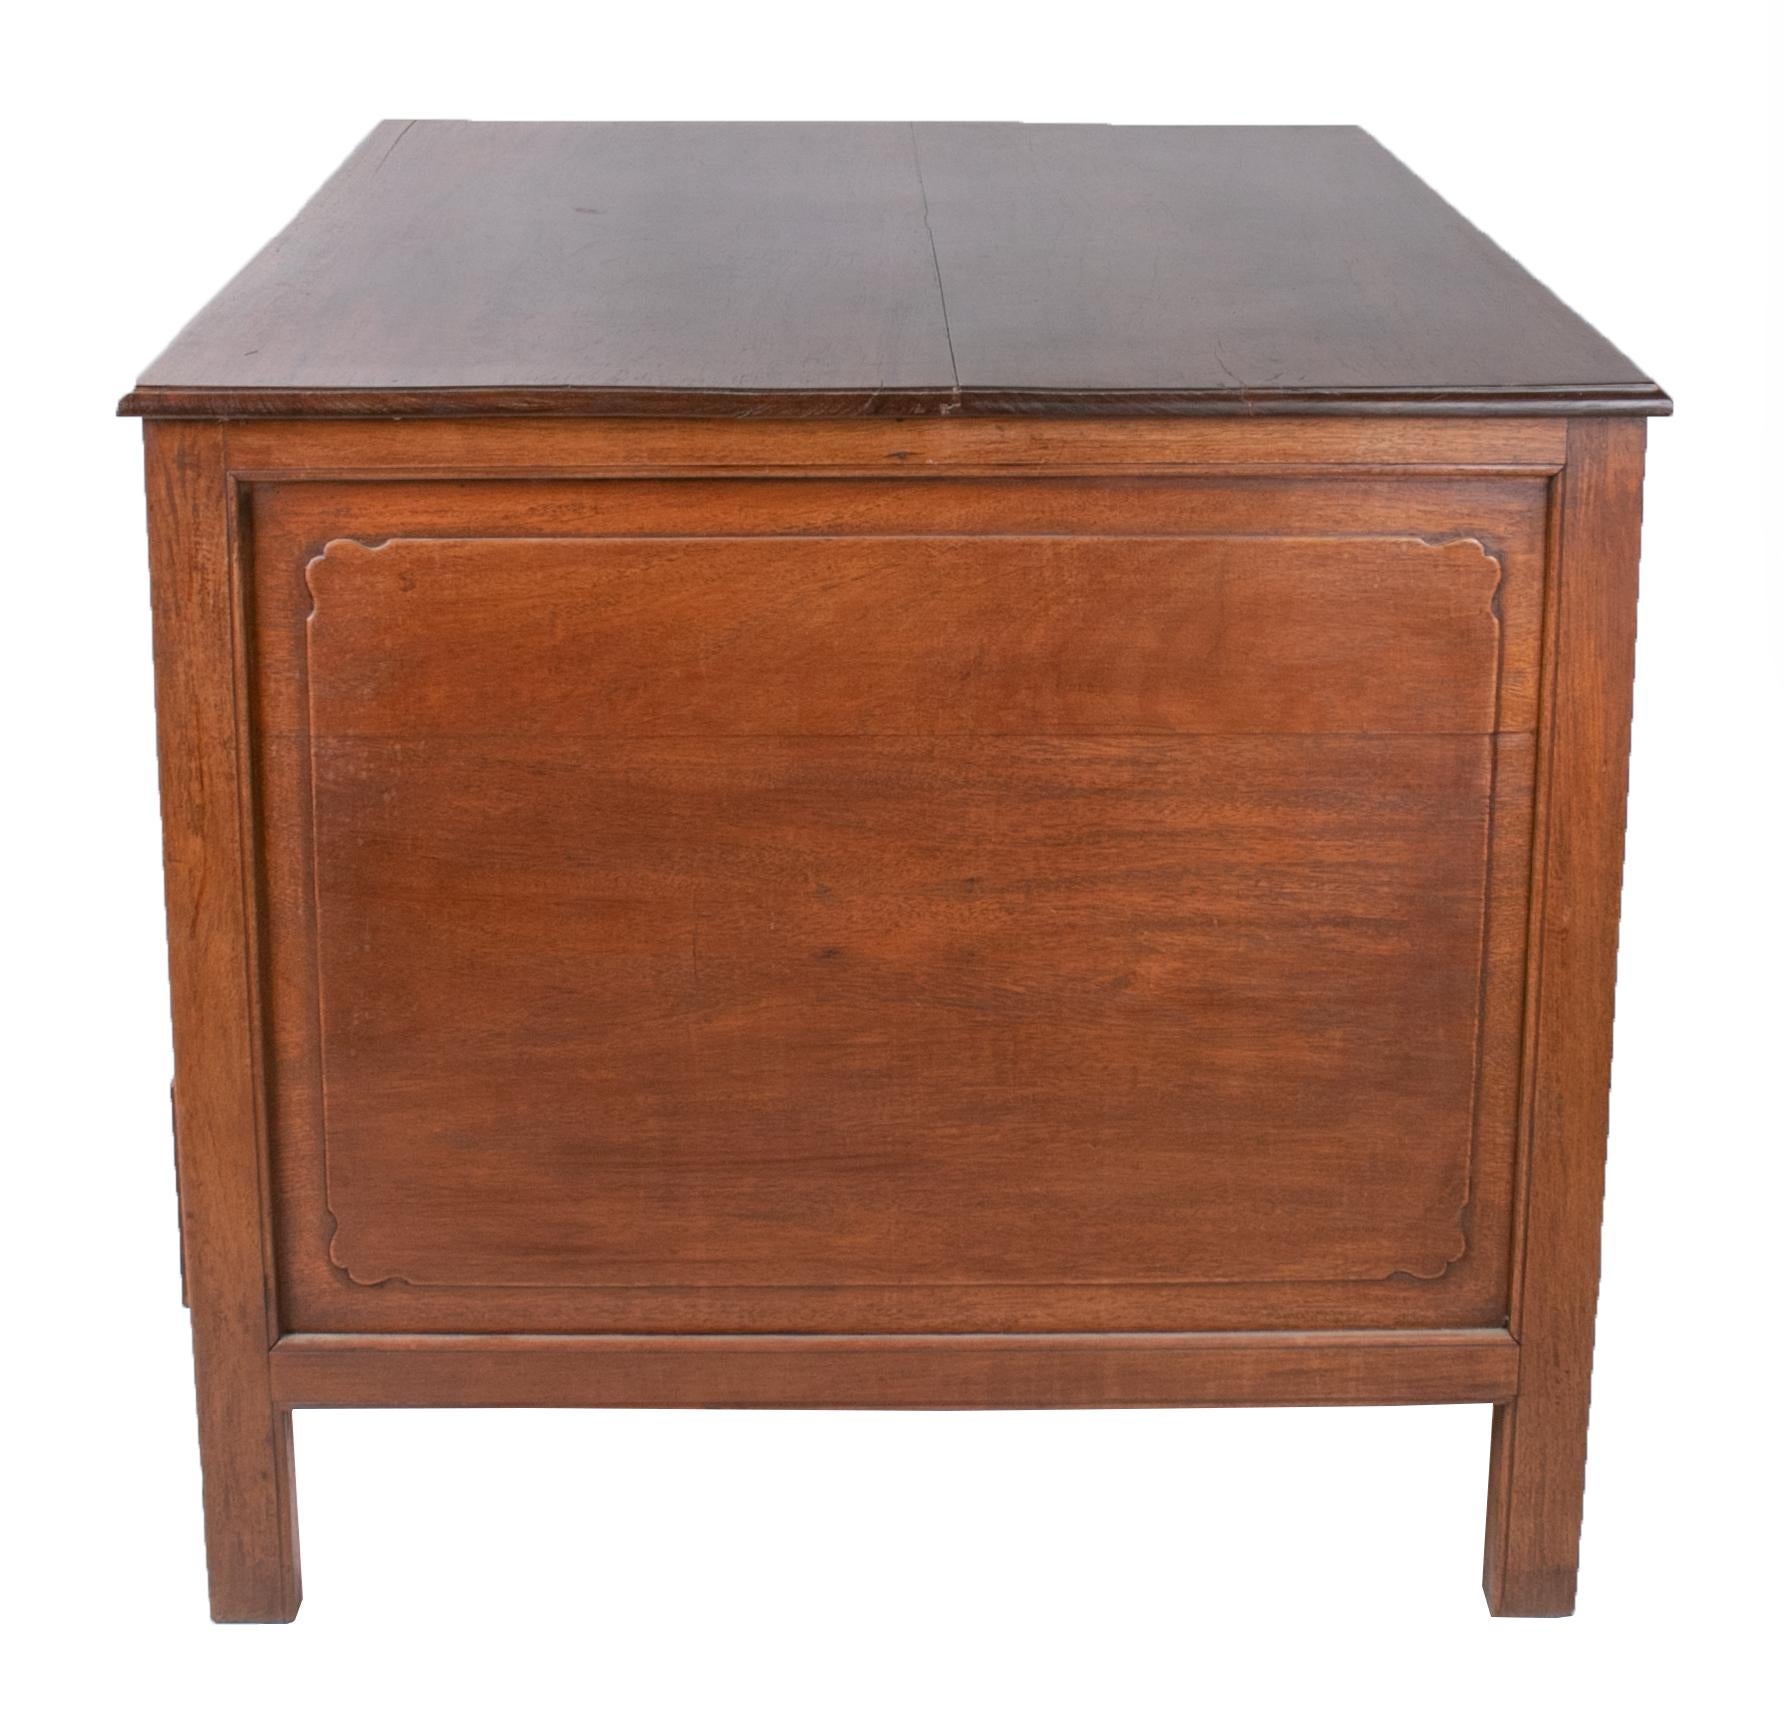 Wood Seven Drawer Executive Desk with Brass Handles from Singapore For Sale